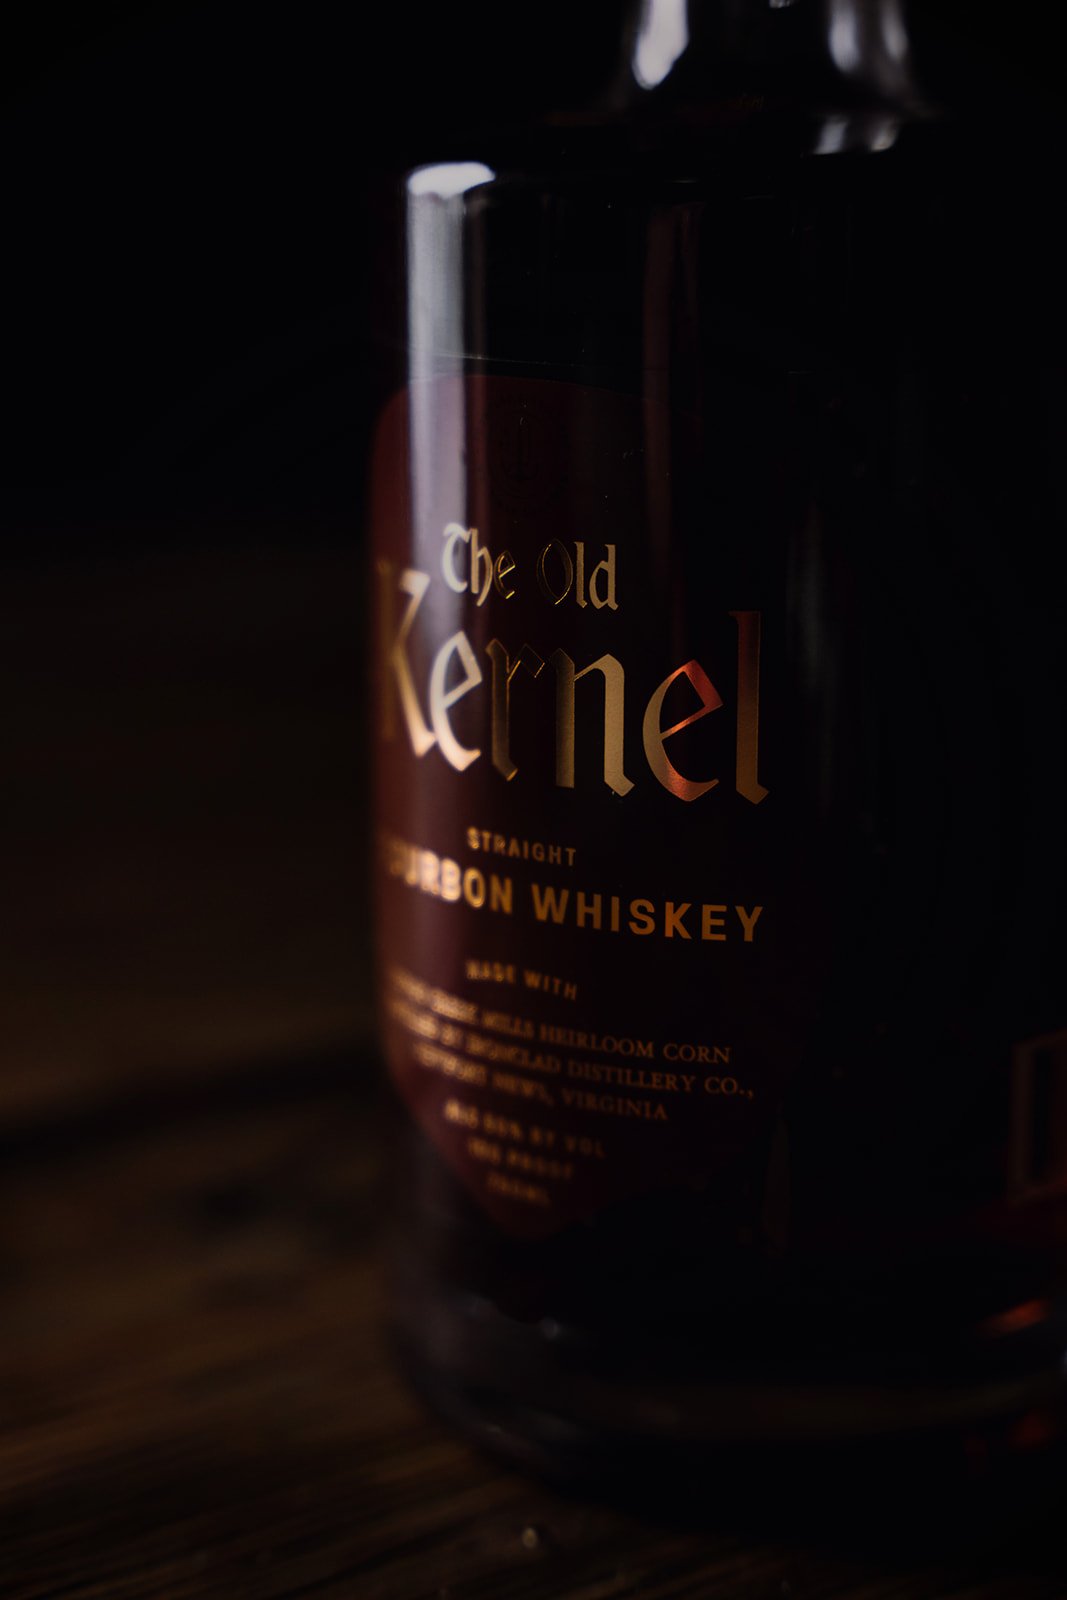 Ironclad - The Old Kernel Straight Bourbon Whiskey